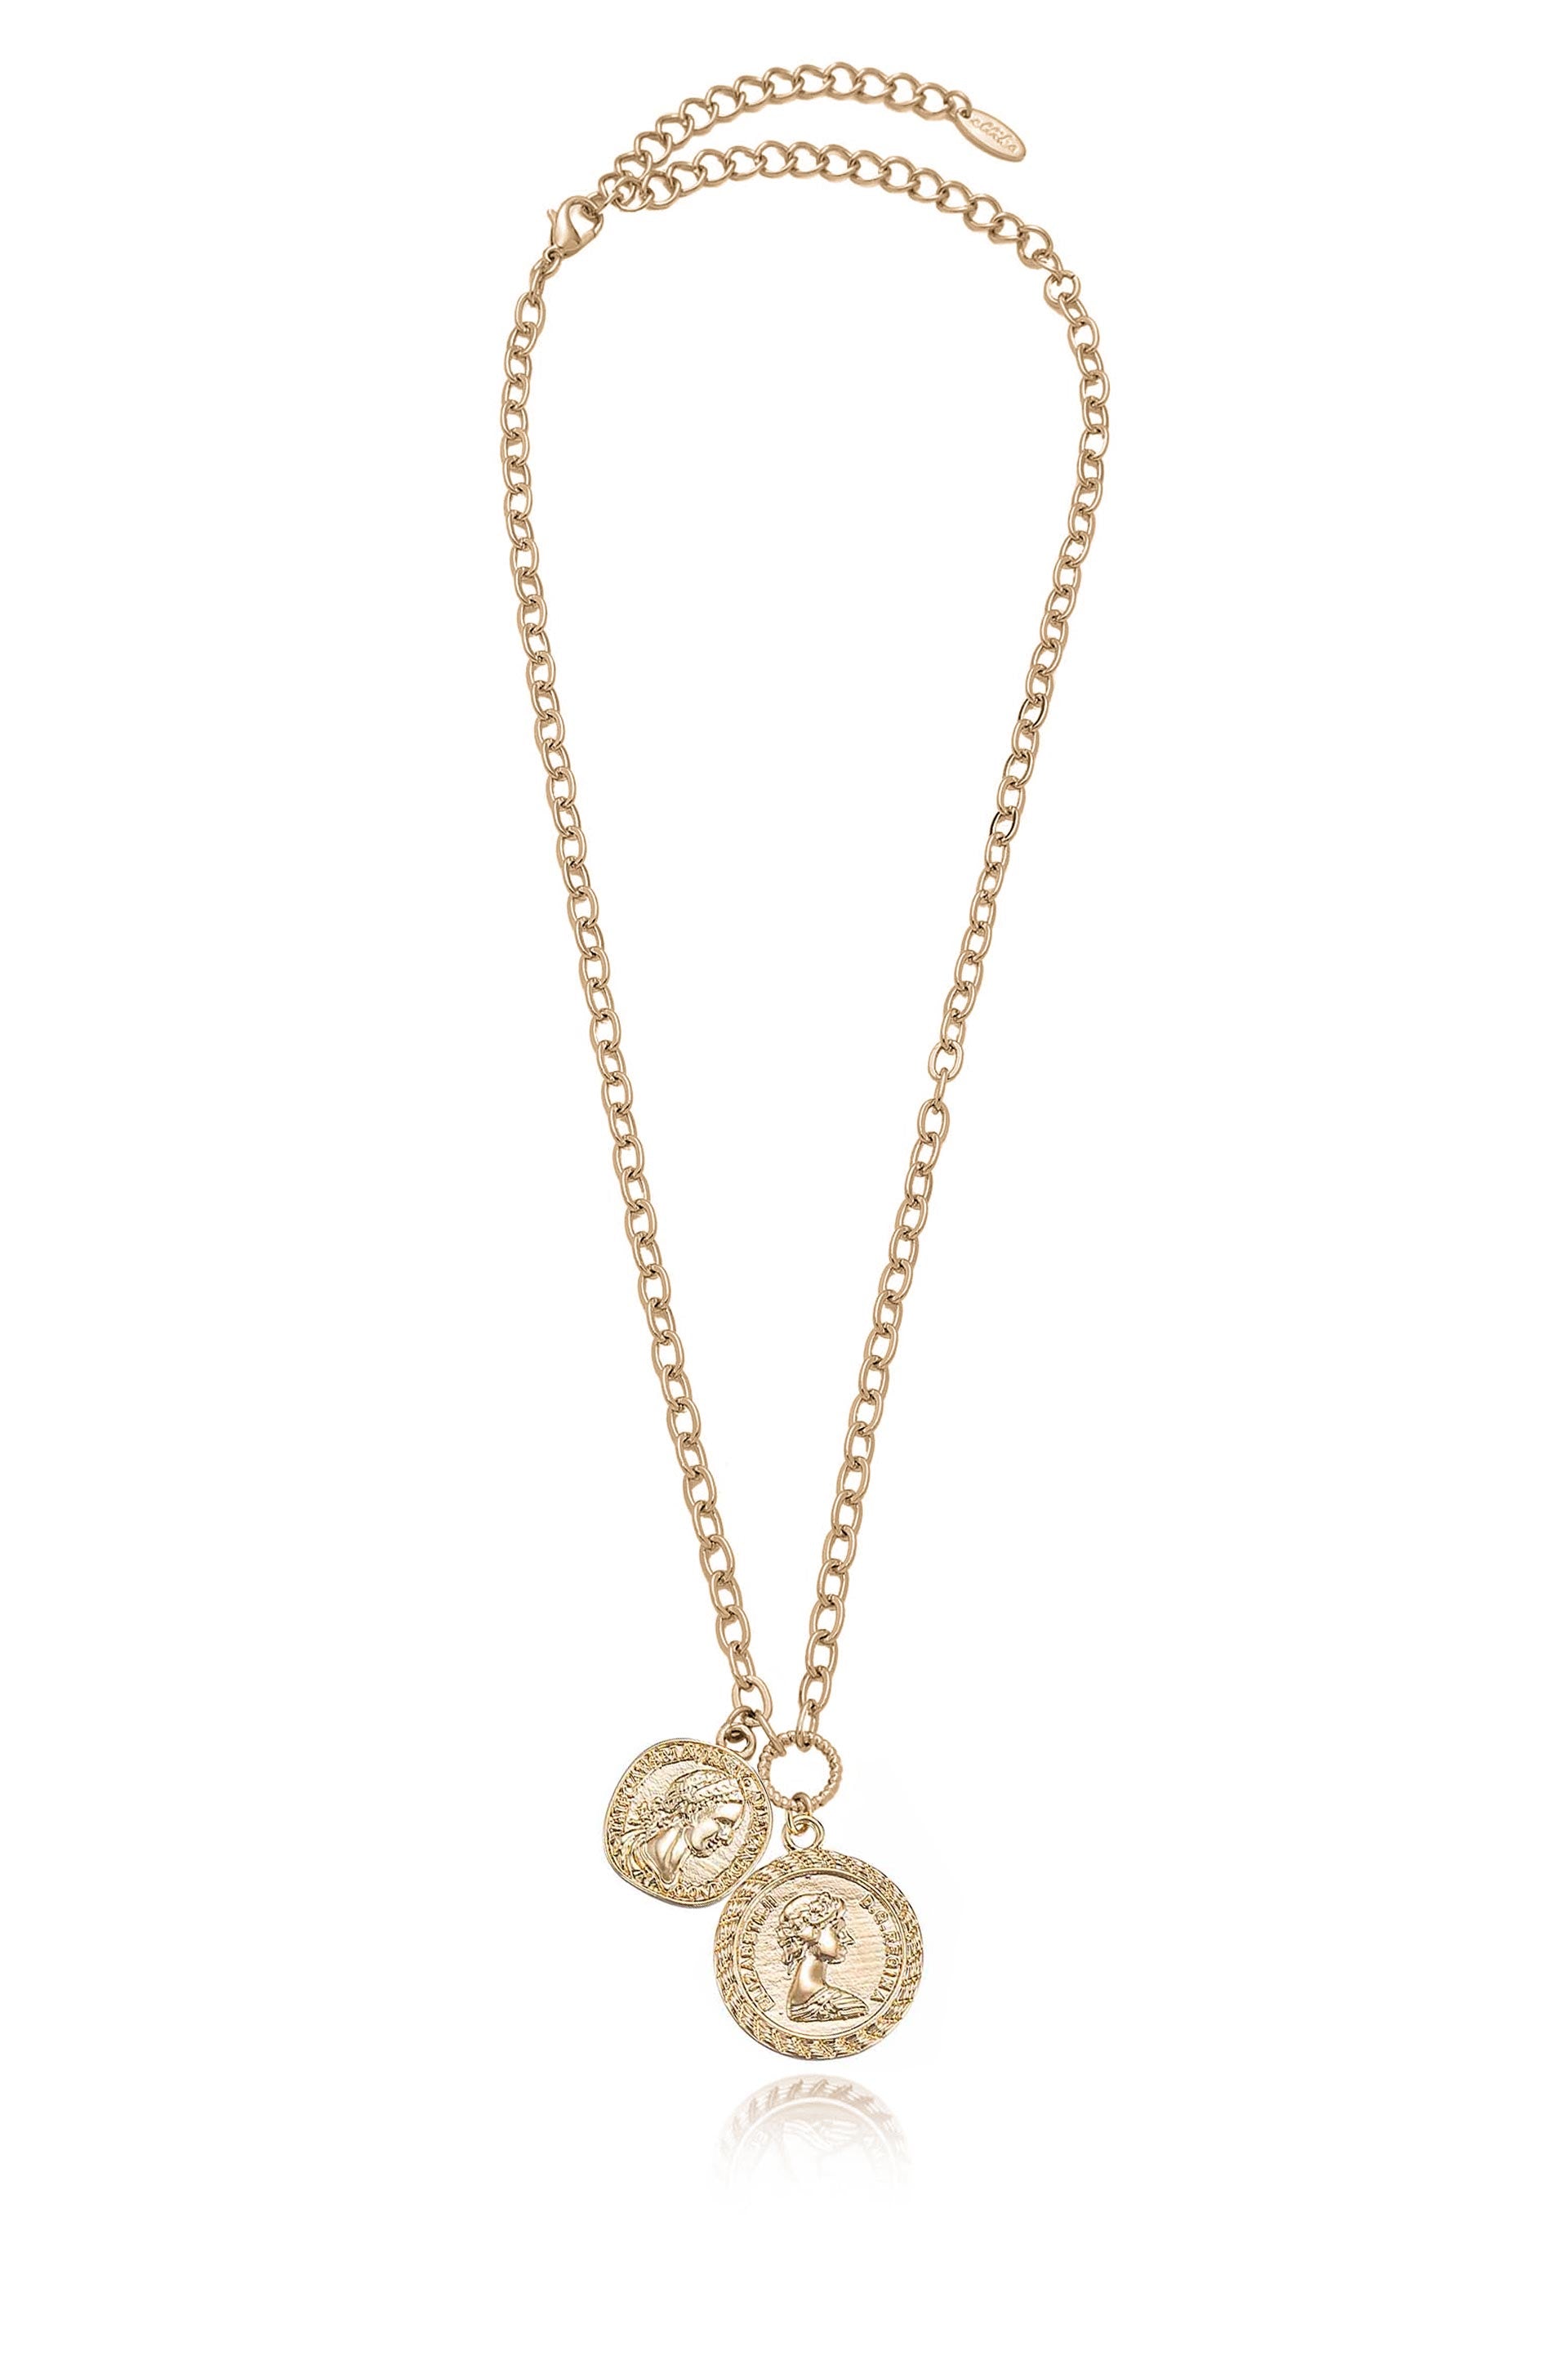 Double Sixpence Coin Necklace By Becca Jewellery | notonthehighstreet.com